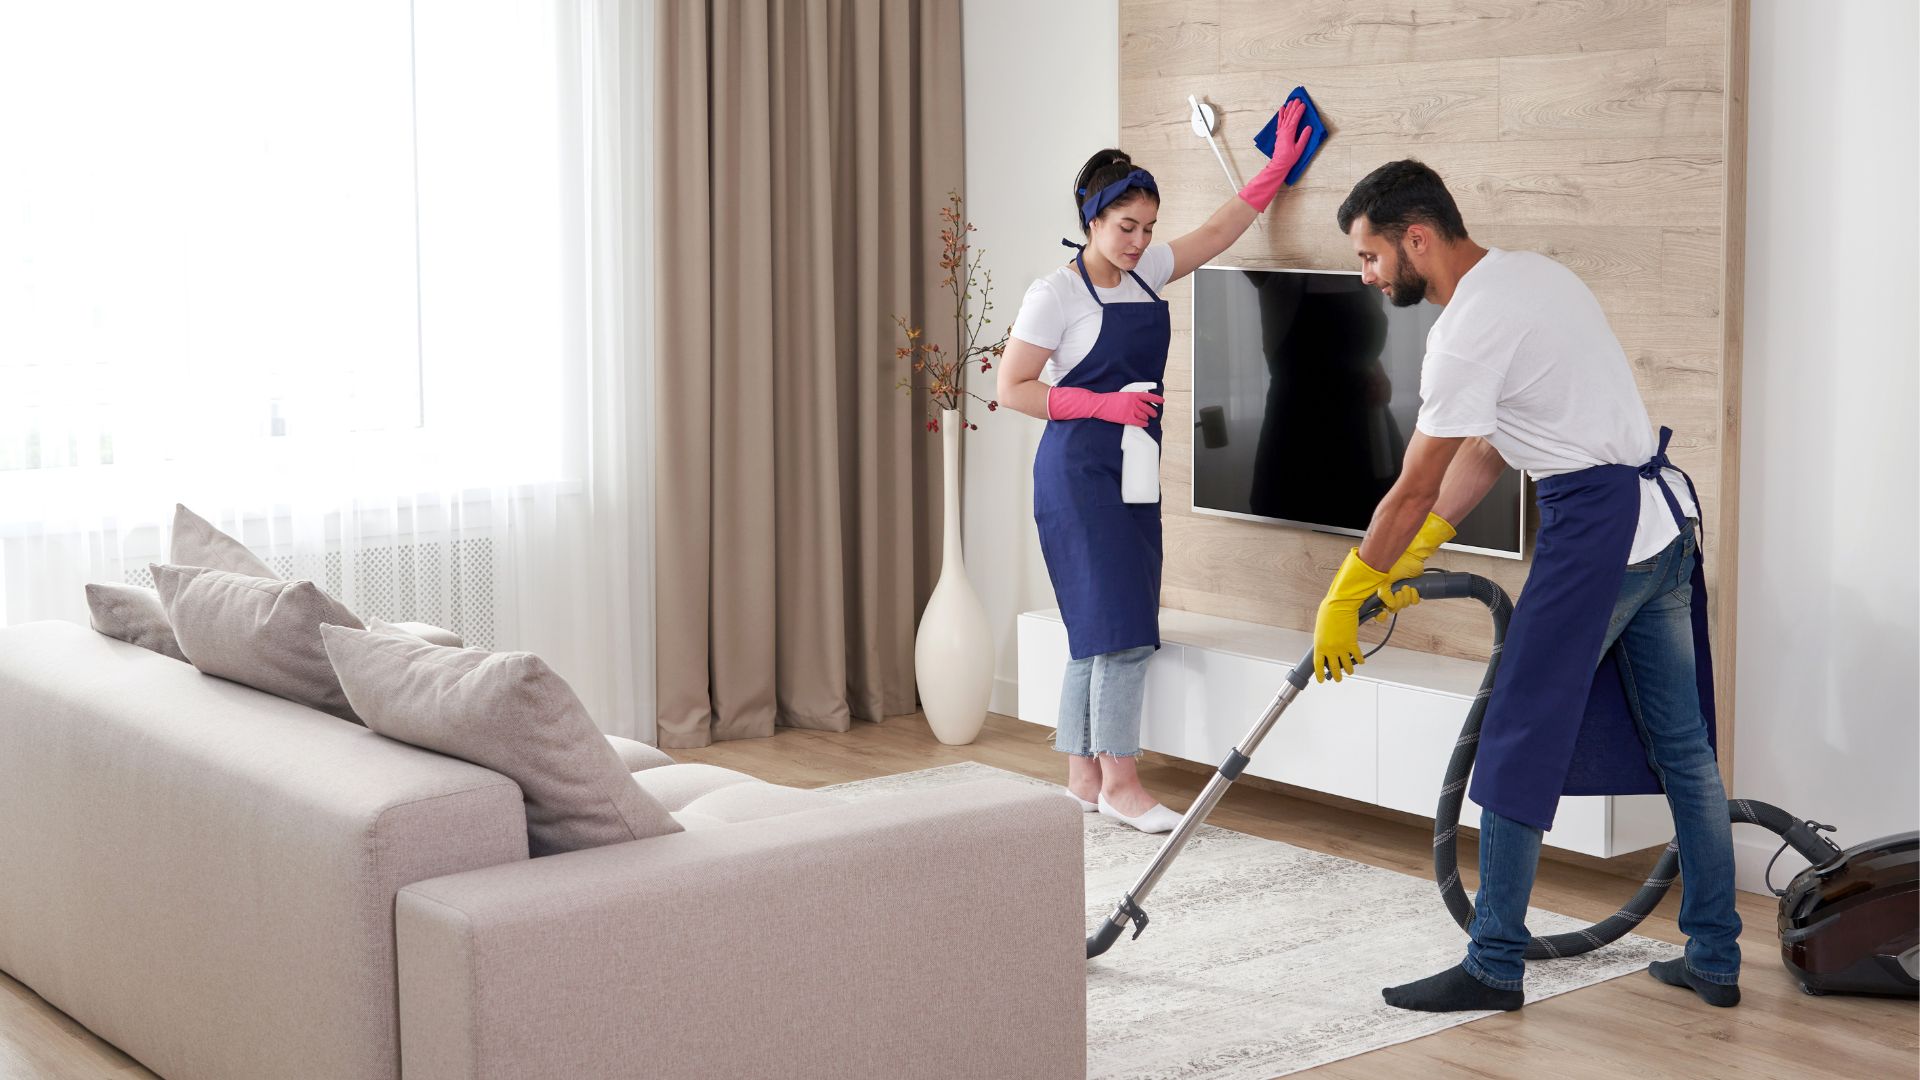 https://nextdaycleaning.com/wp-content/uploads/2023/02/Whats-the-breakdown-of-House-Cleaning-Prices.jpg